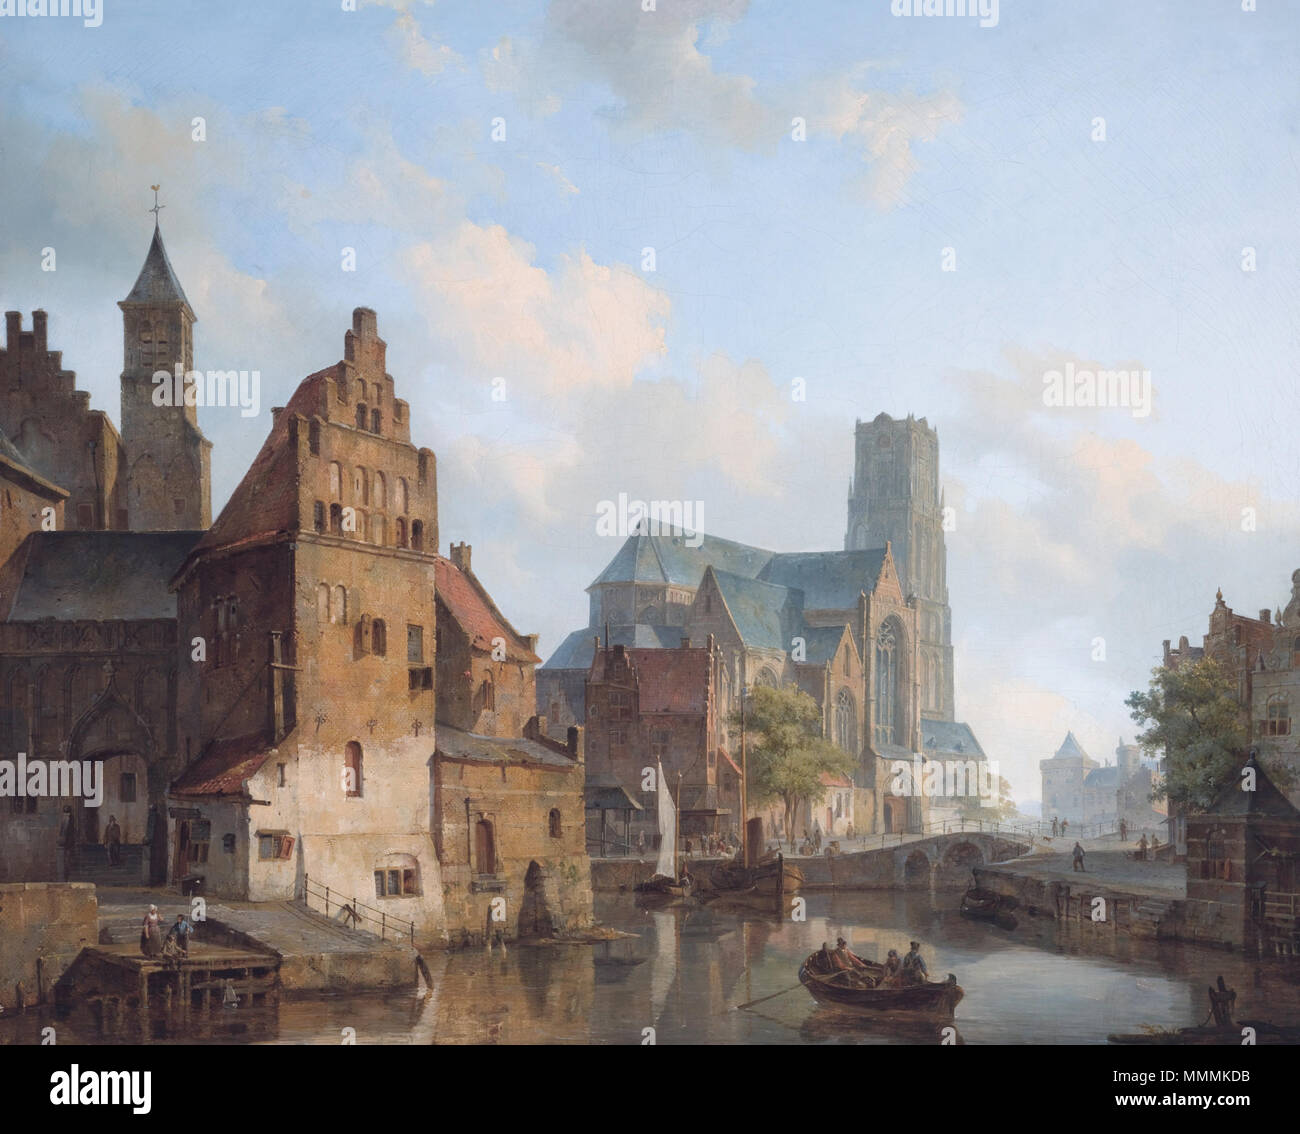 .  English: A View of the Delftse Vaart and Saint Laurens Church, Rotterdam oil on canvas 75 x 91 cm signed l.r.: C Springer 1840   A View of the Delftse Vaart and Saint Laurens Church, Rotterdam  *oil on canvas  *75 x 91 cm  *signed l.r.: C Springer 1840 Delftse Vaart and the St Laurens church in Rotterdam, by Cornelis Springer Stock Photo